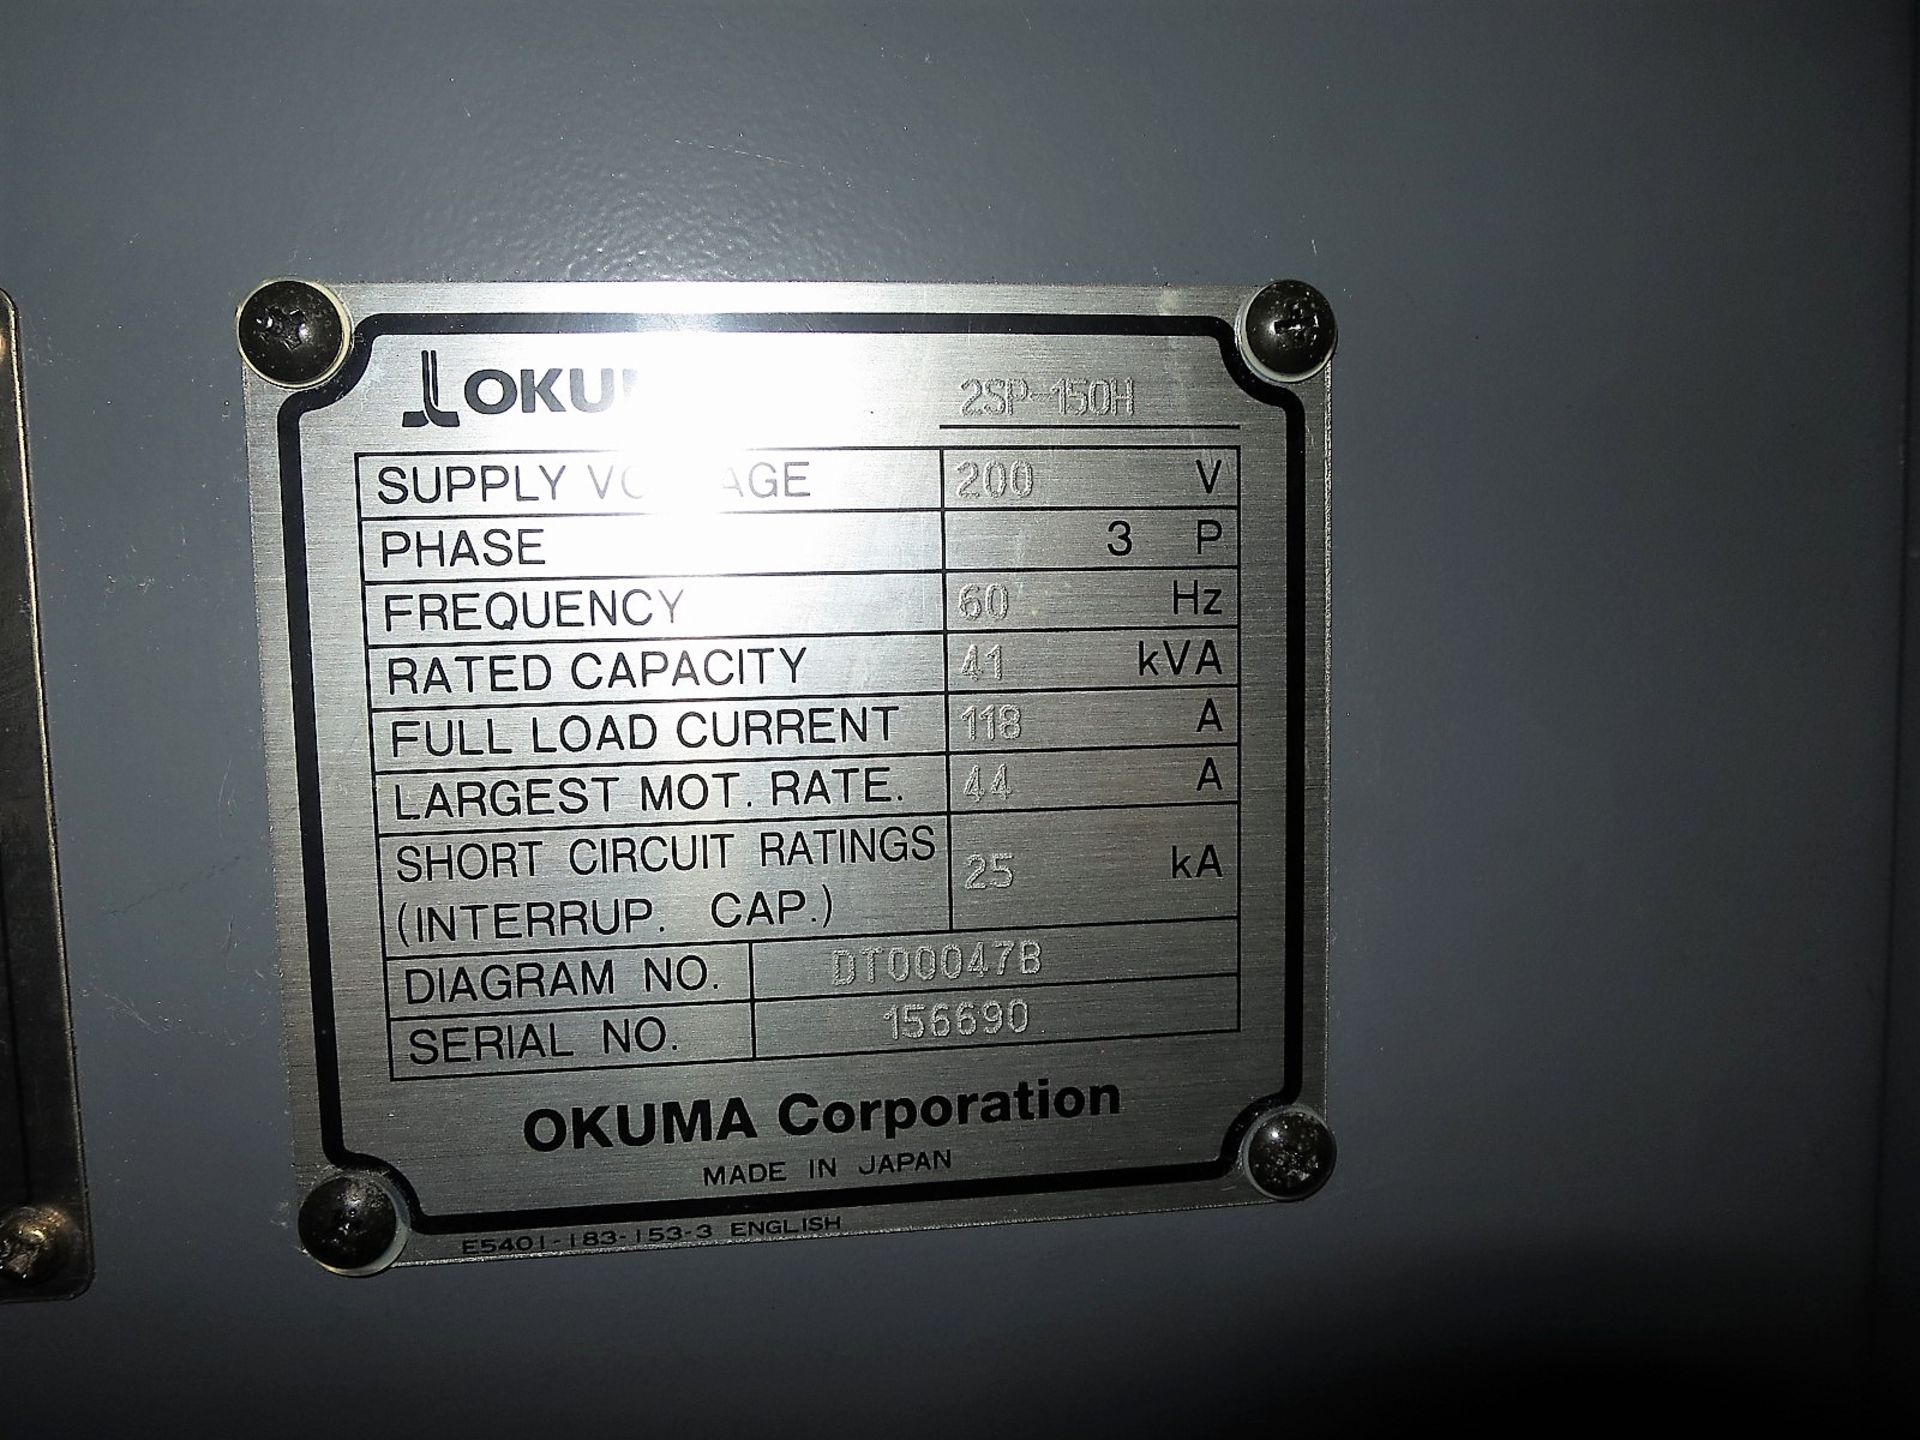 OKUMA 2SP-150HM TWIN SPINDLE 3-AXIS TURNING CENTER W/LIVE MILLING, S/N 156690, NEW 2011 - Image 11 of 11